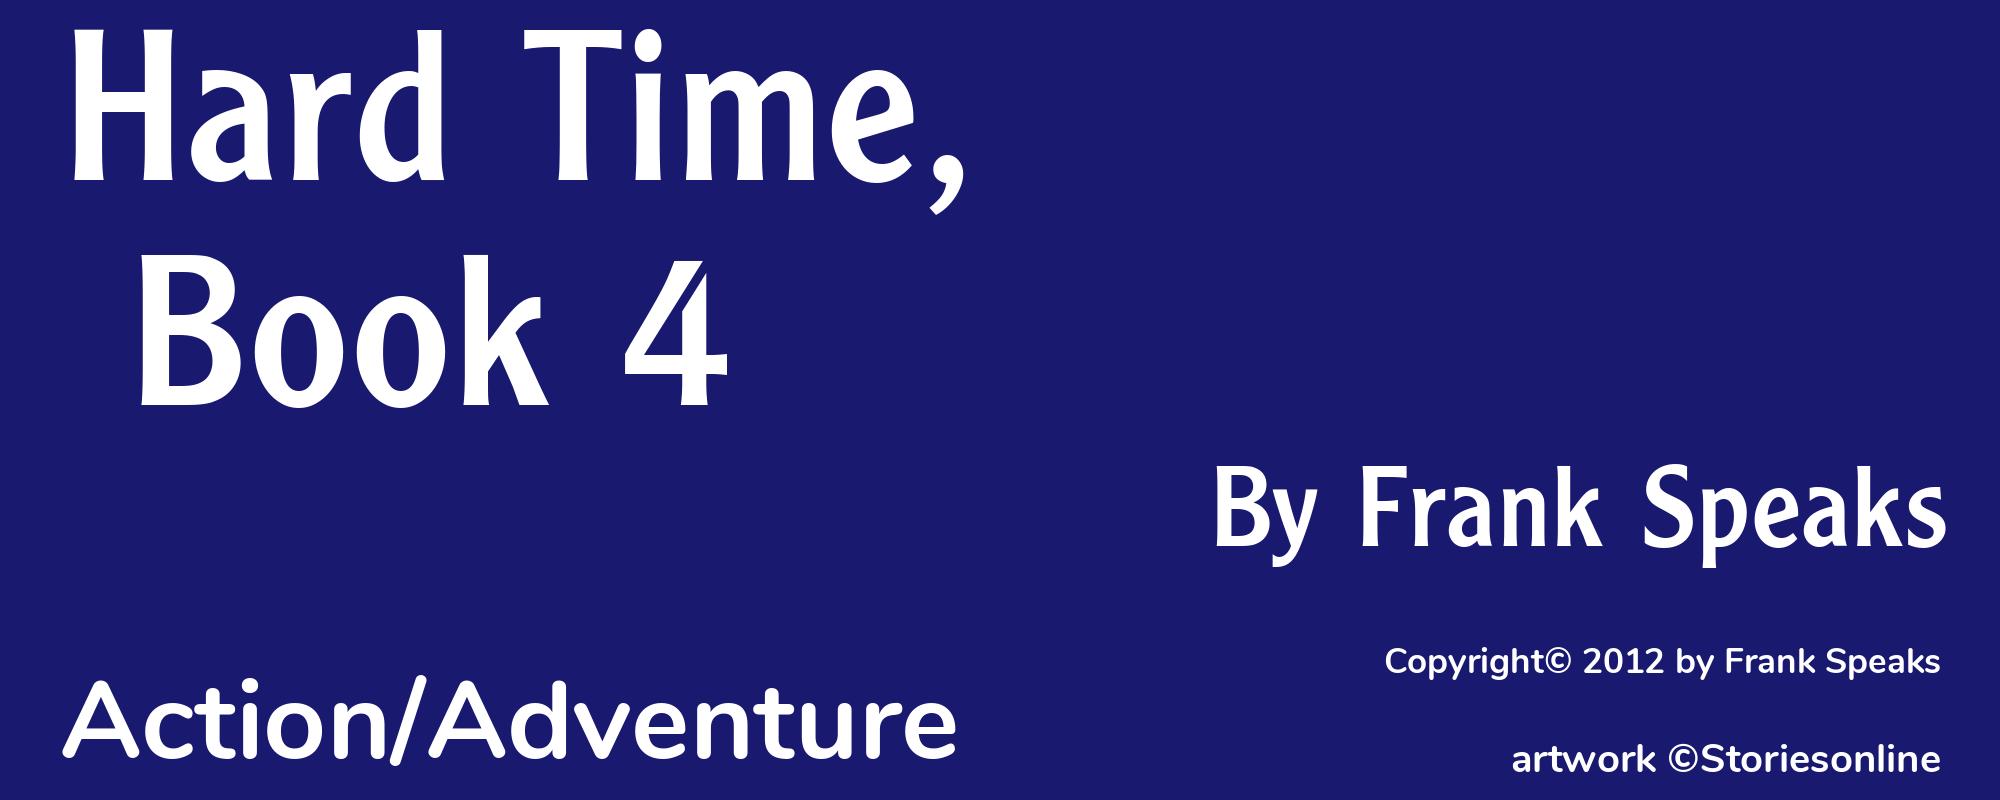 Hard Time, Book 4 - Cover